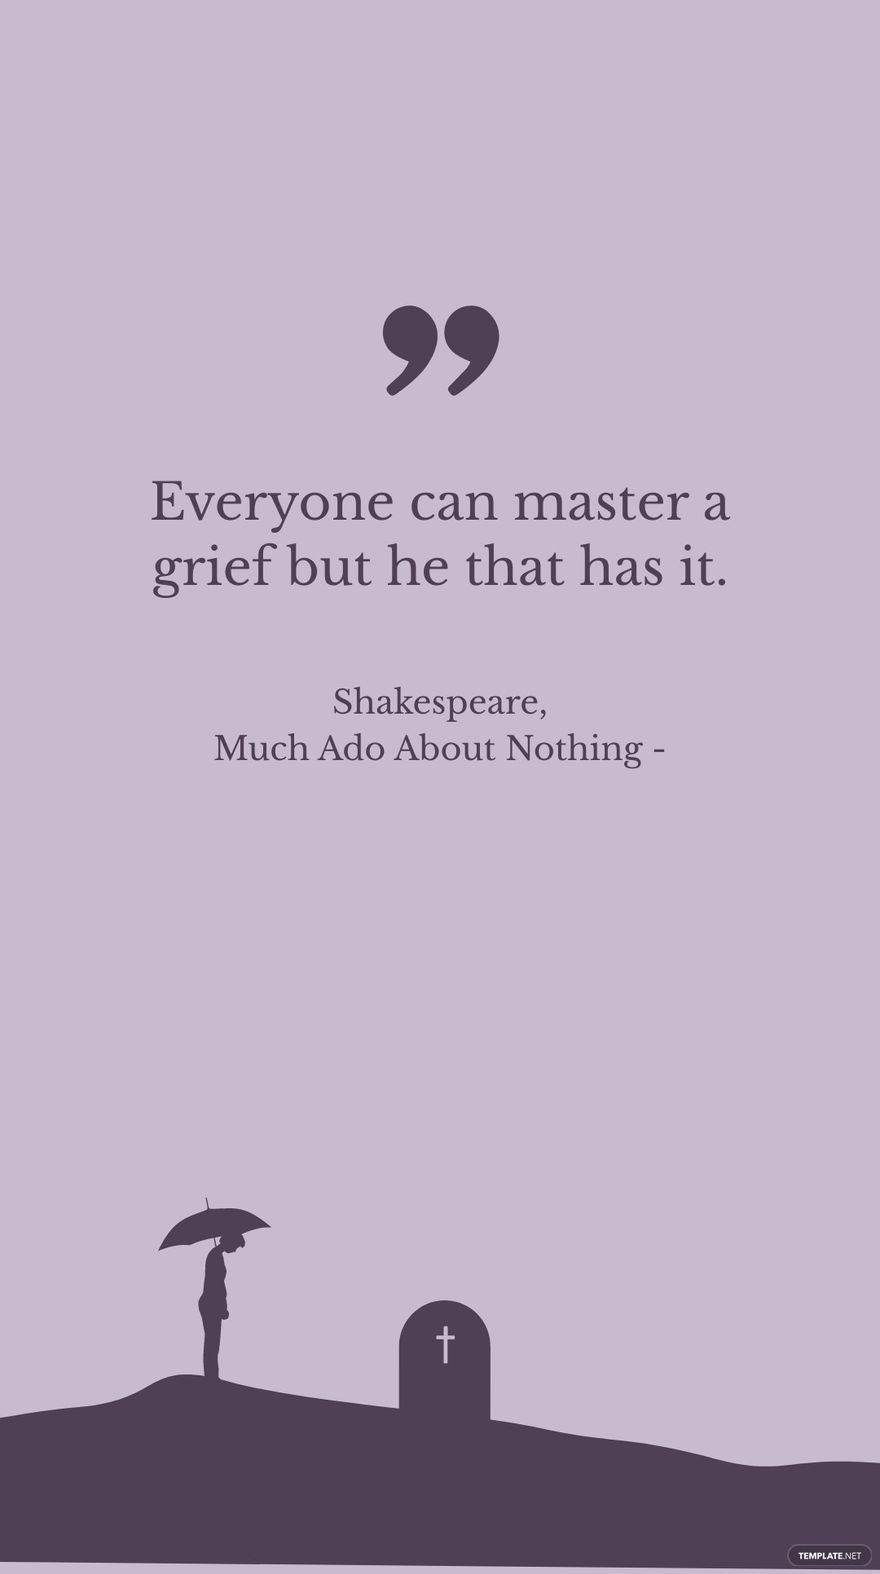 Shakespeare, Much Ado About Nothing - Everyone can master a grief but he that has it.